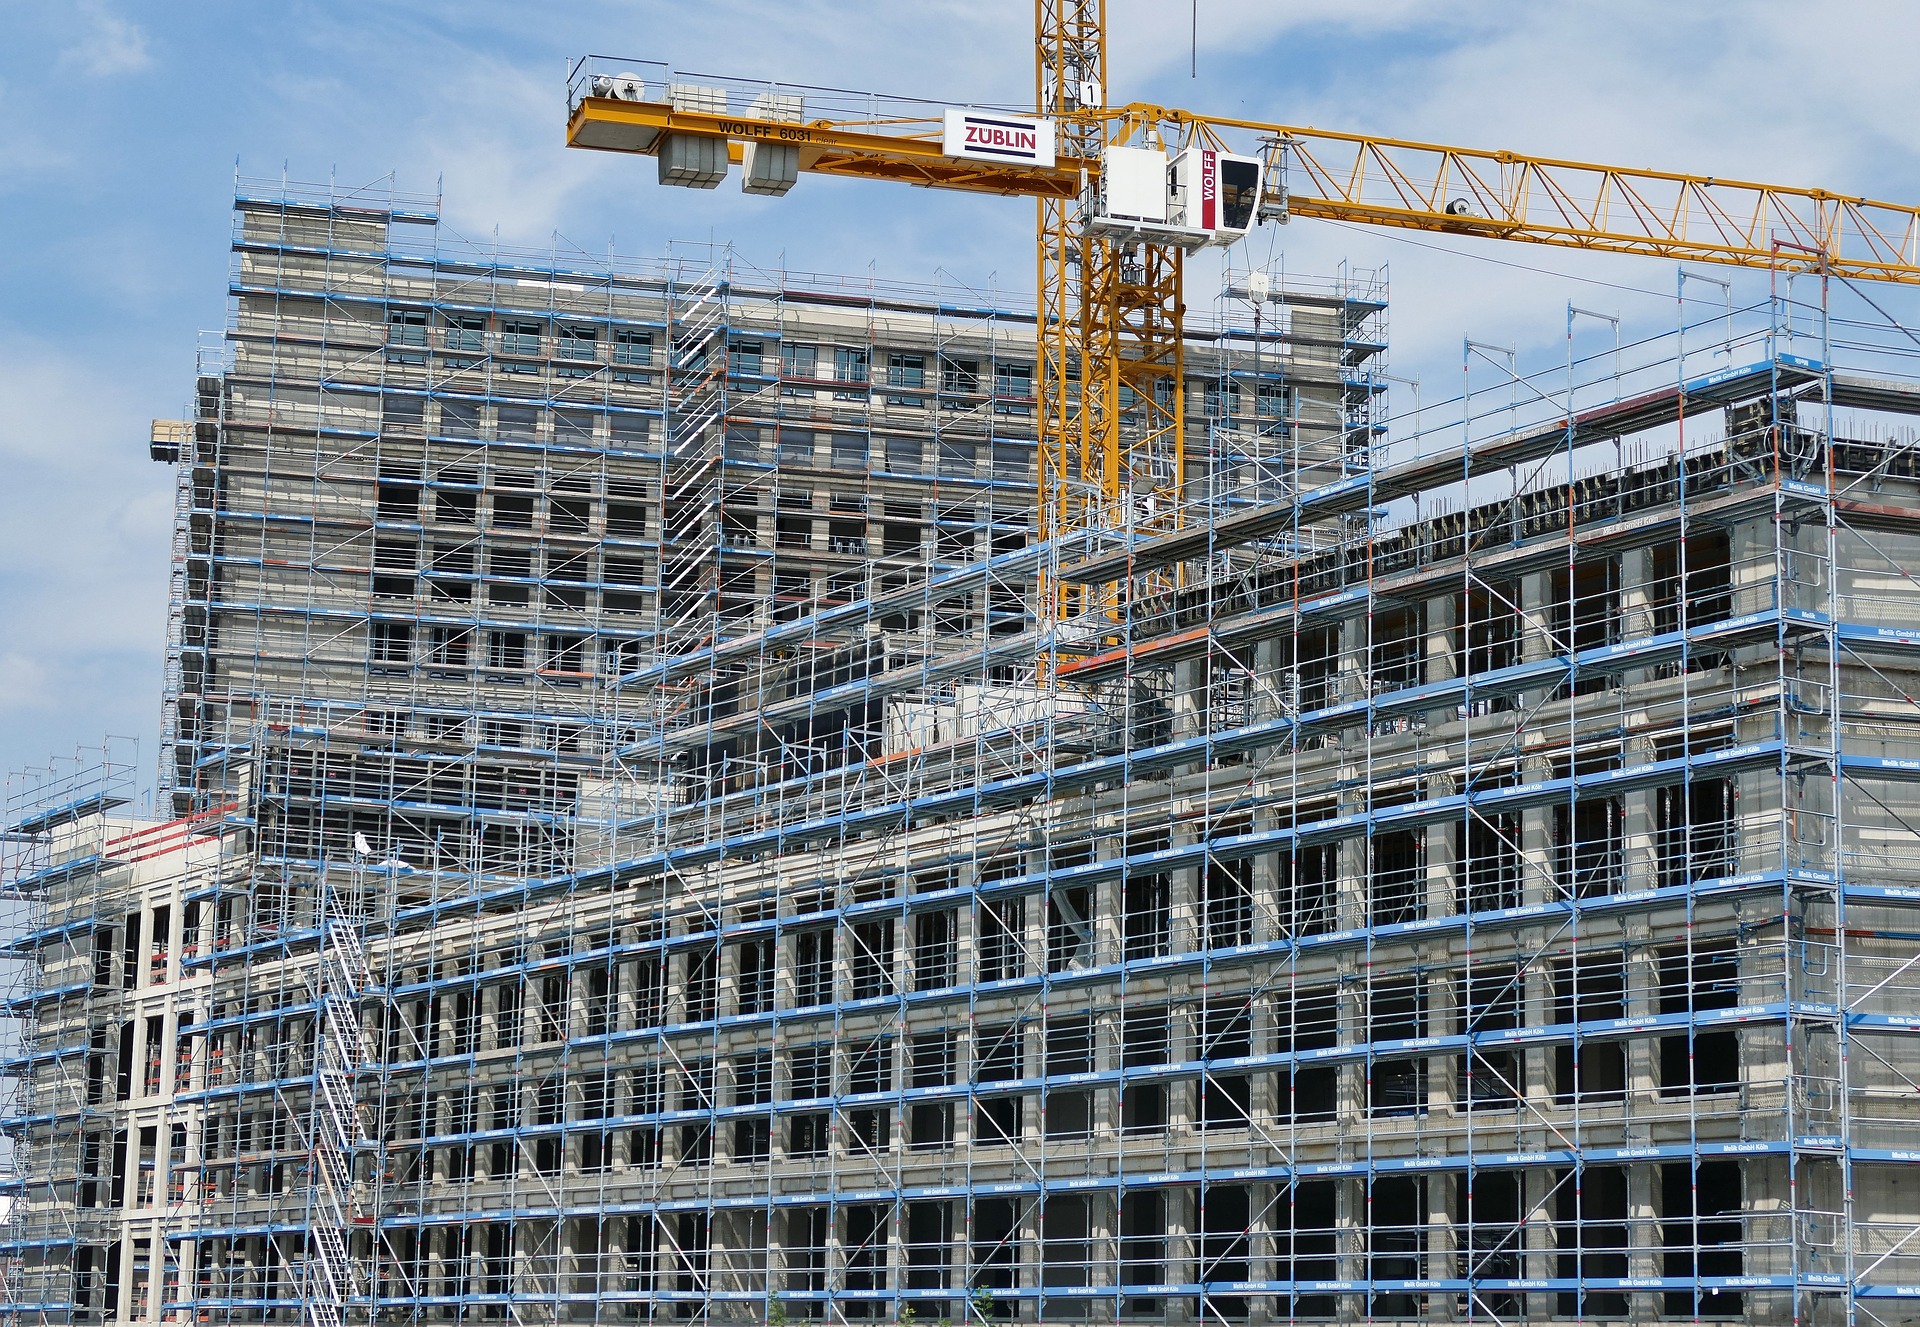 Europe’s five largest multi-family housing construction projects that commenced in Q2 2022